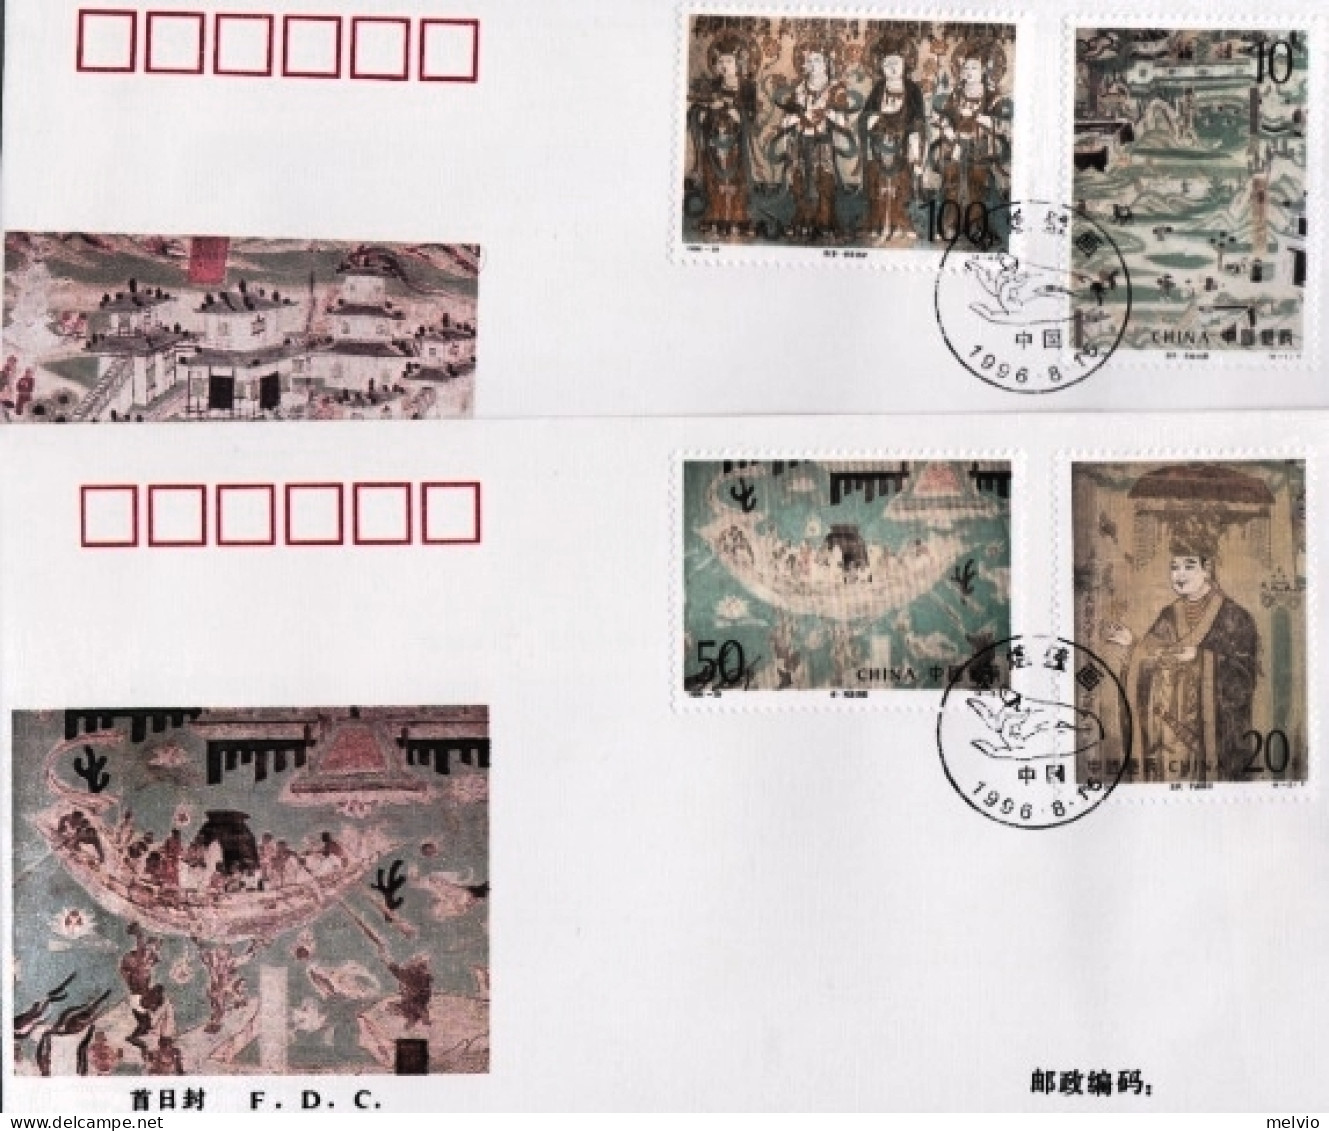 1996-Cina China 20, Scott 2704-08 Dunhuang Murals Fdc - Covers & Documents